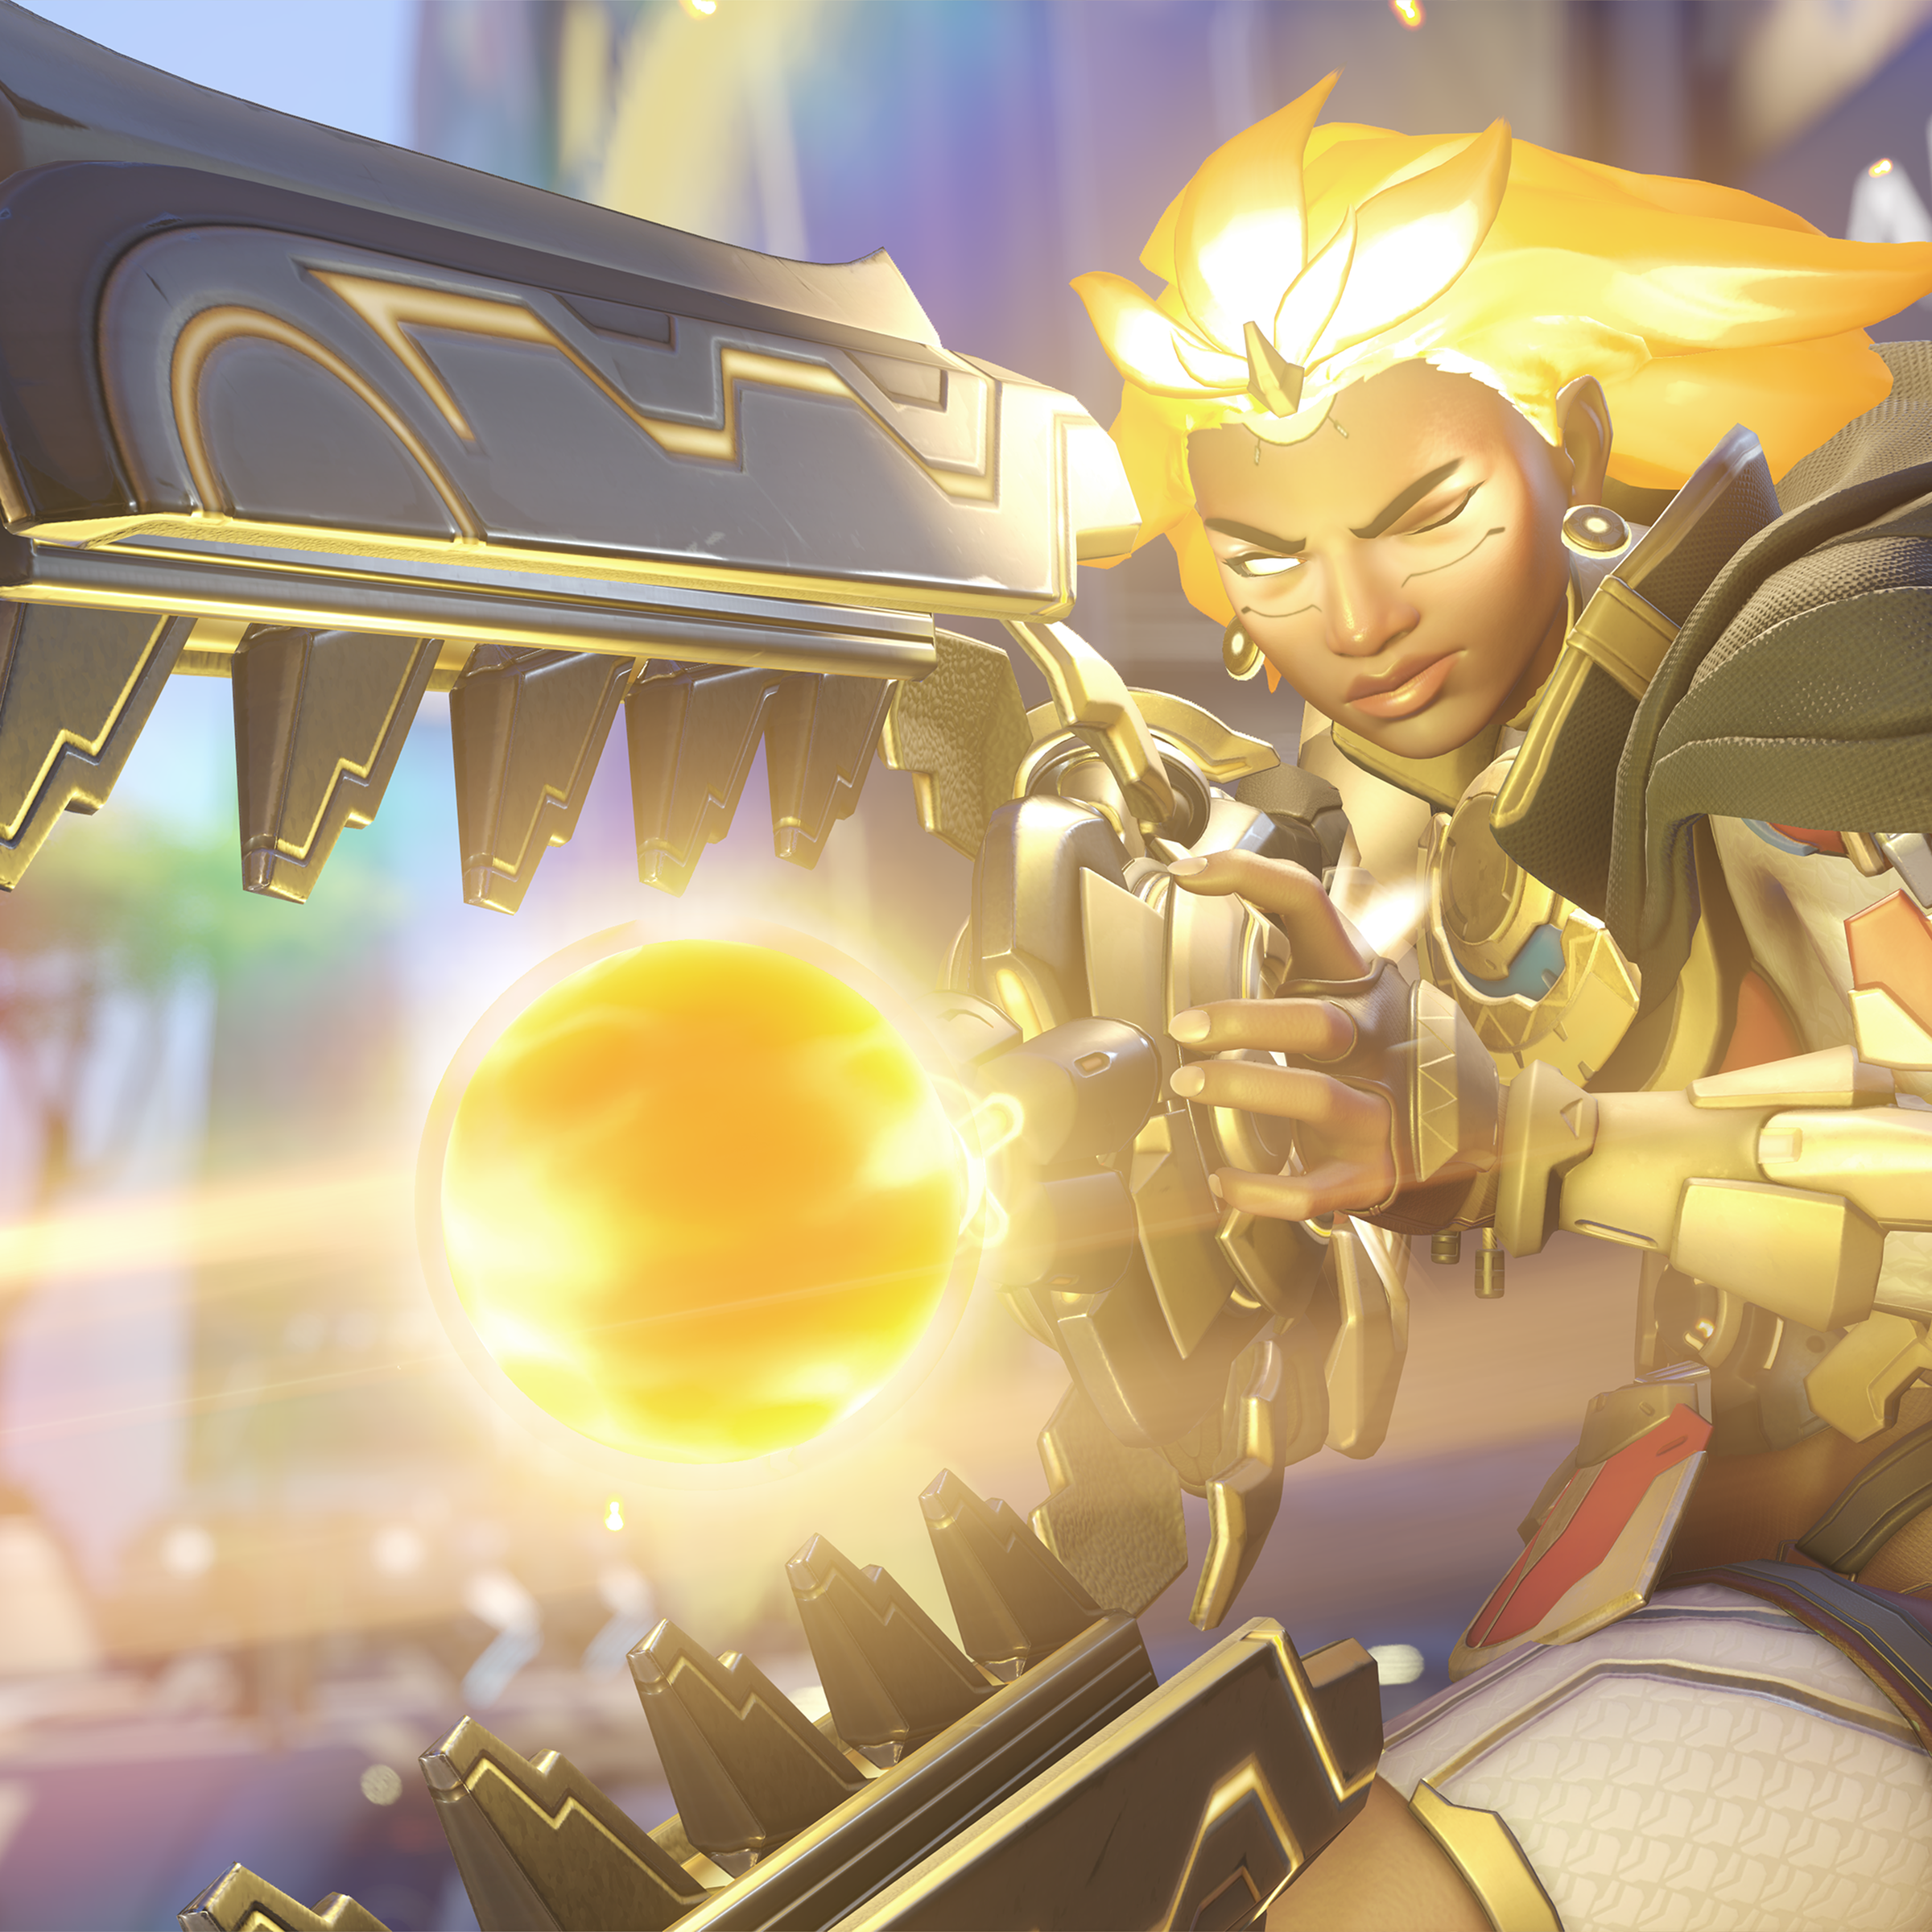 Screenshot from Overwatch 2 featuring the new support hero Illari, her hair glowing gold as she unleashes  her ultimate Captive Sun